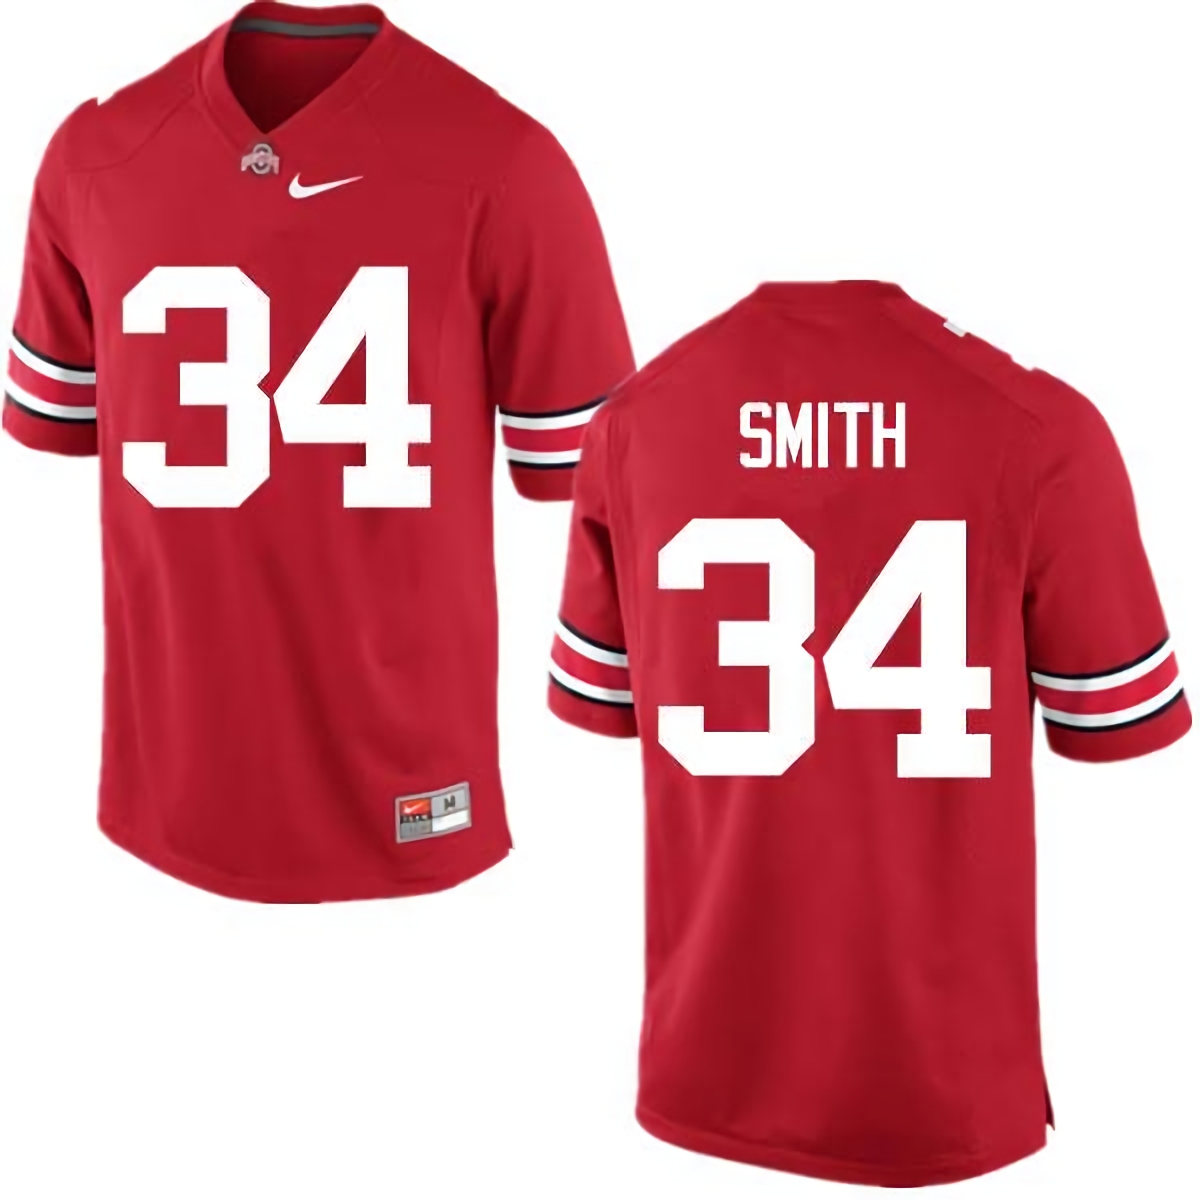 Erick Smith Ohio State Buckeyes Men's NCAA #34 Nike Red College Stitched Football Jersey JFO0856PV